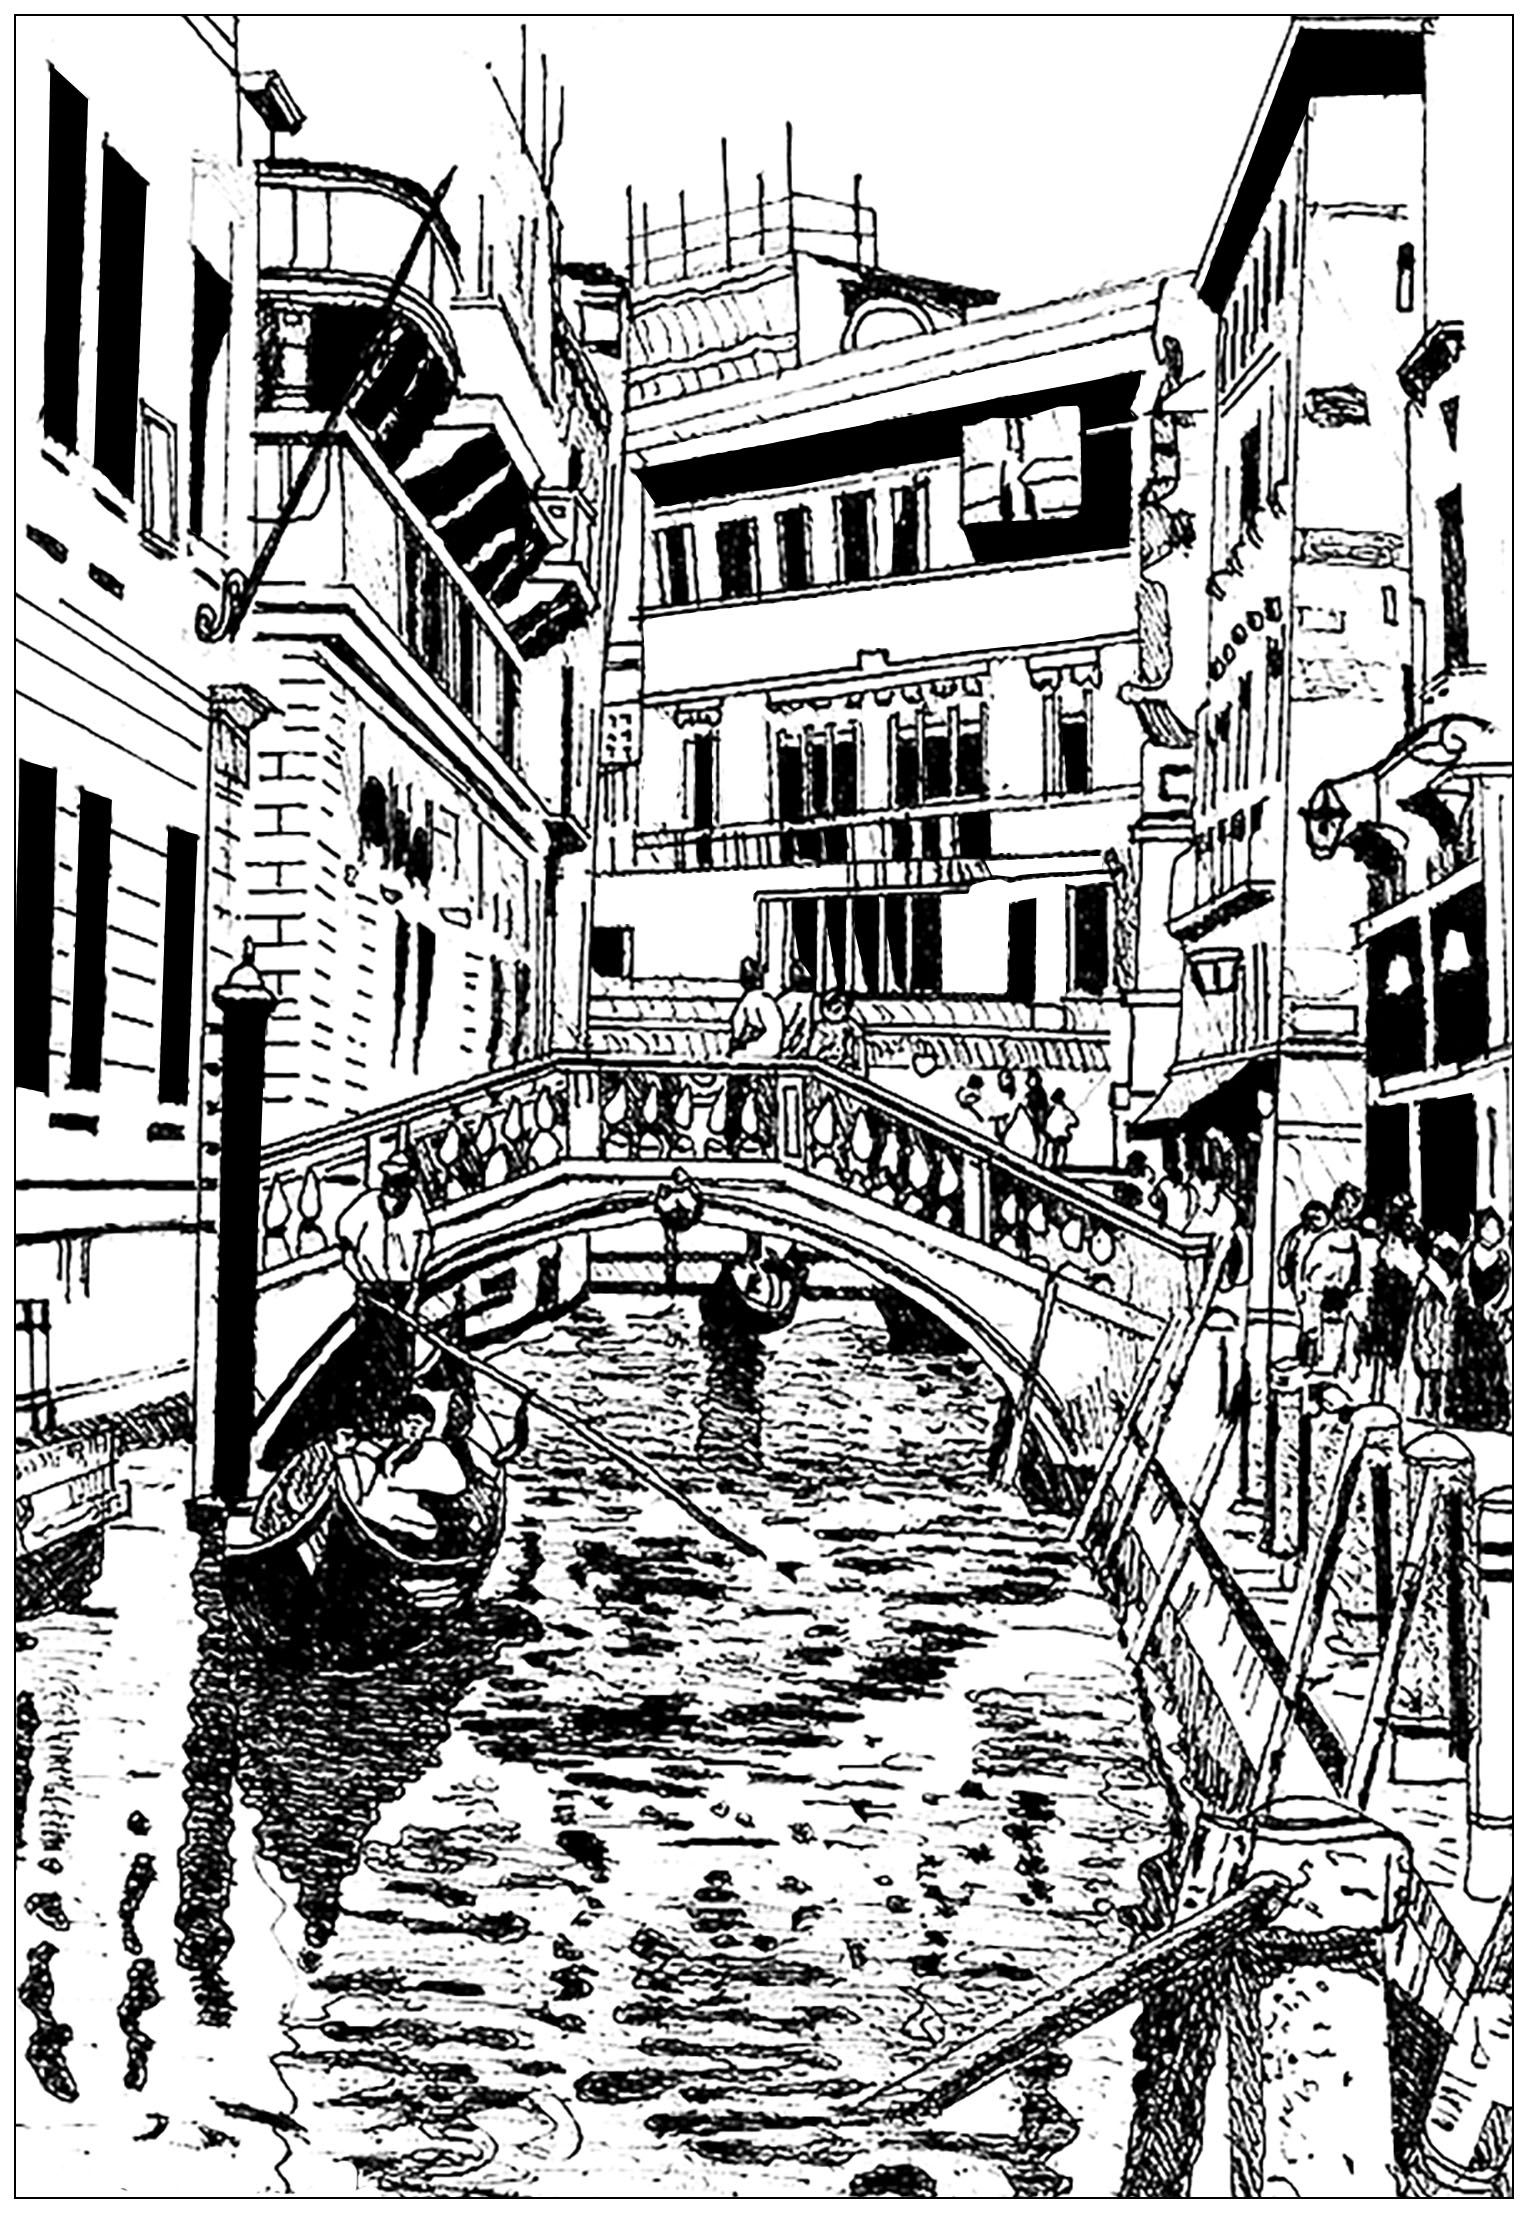 Drawing of Venice, in Italy